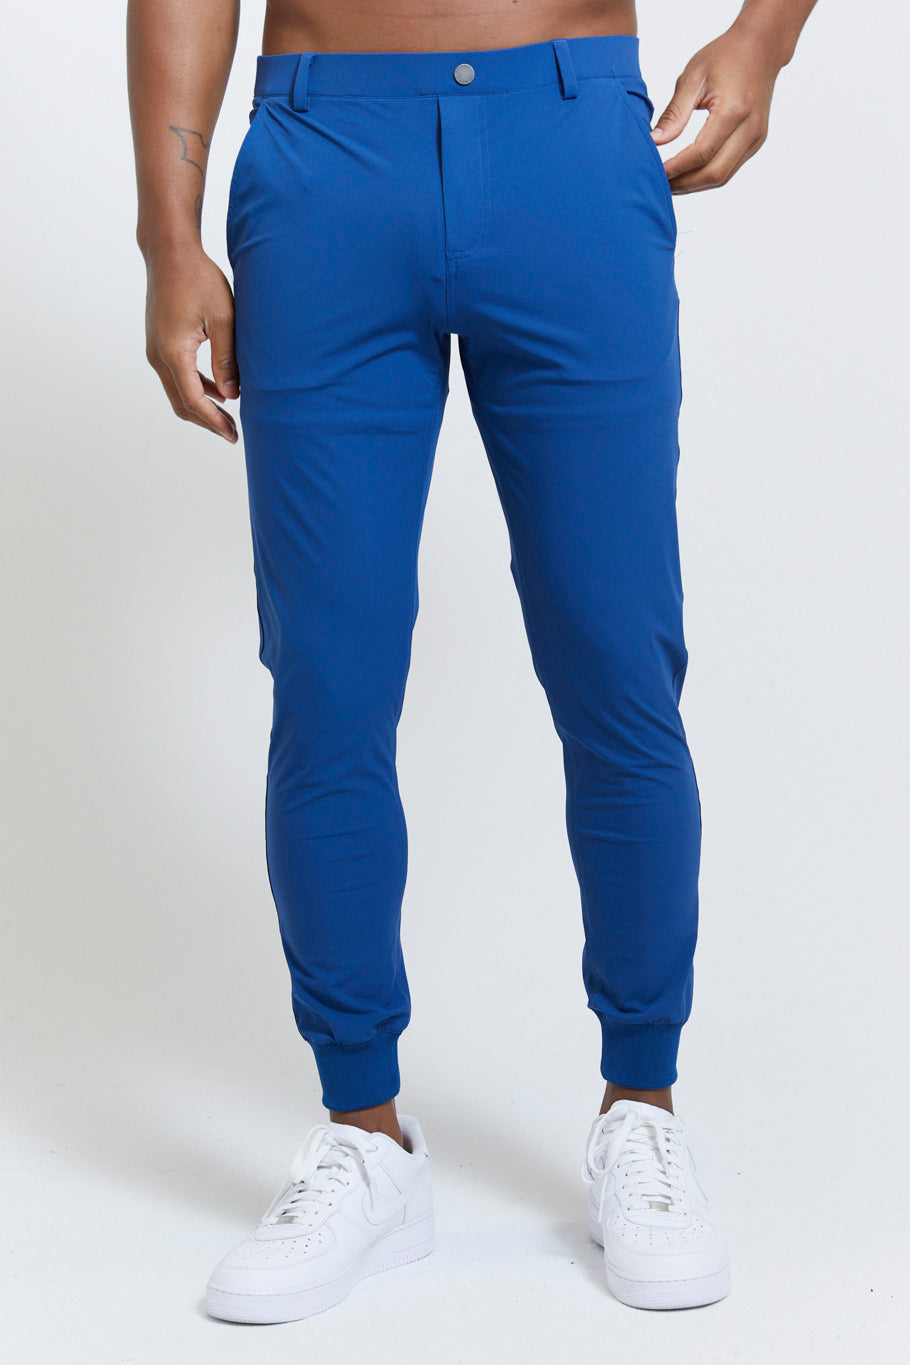 Halliday Men's Joggers - Athletic Pants in Admiral Blue – REDVANLY